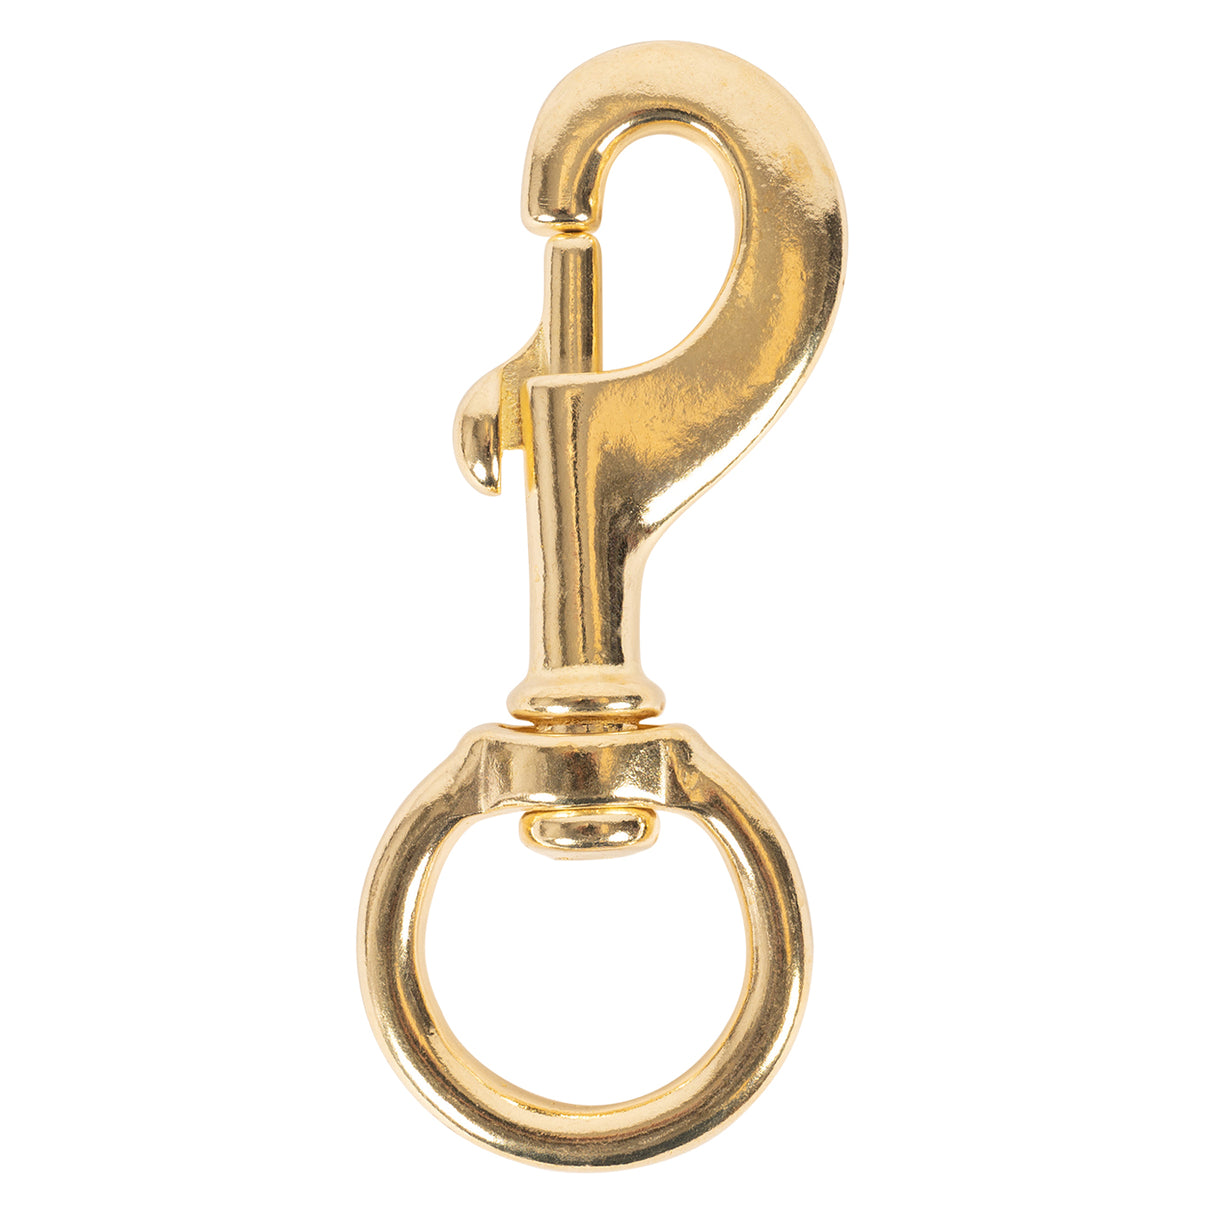 Shedrow Large Swivel Bolt Brass Snap 4 3-4 In.